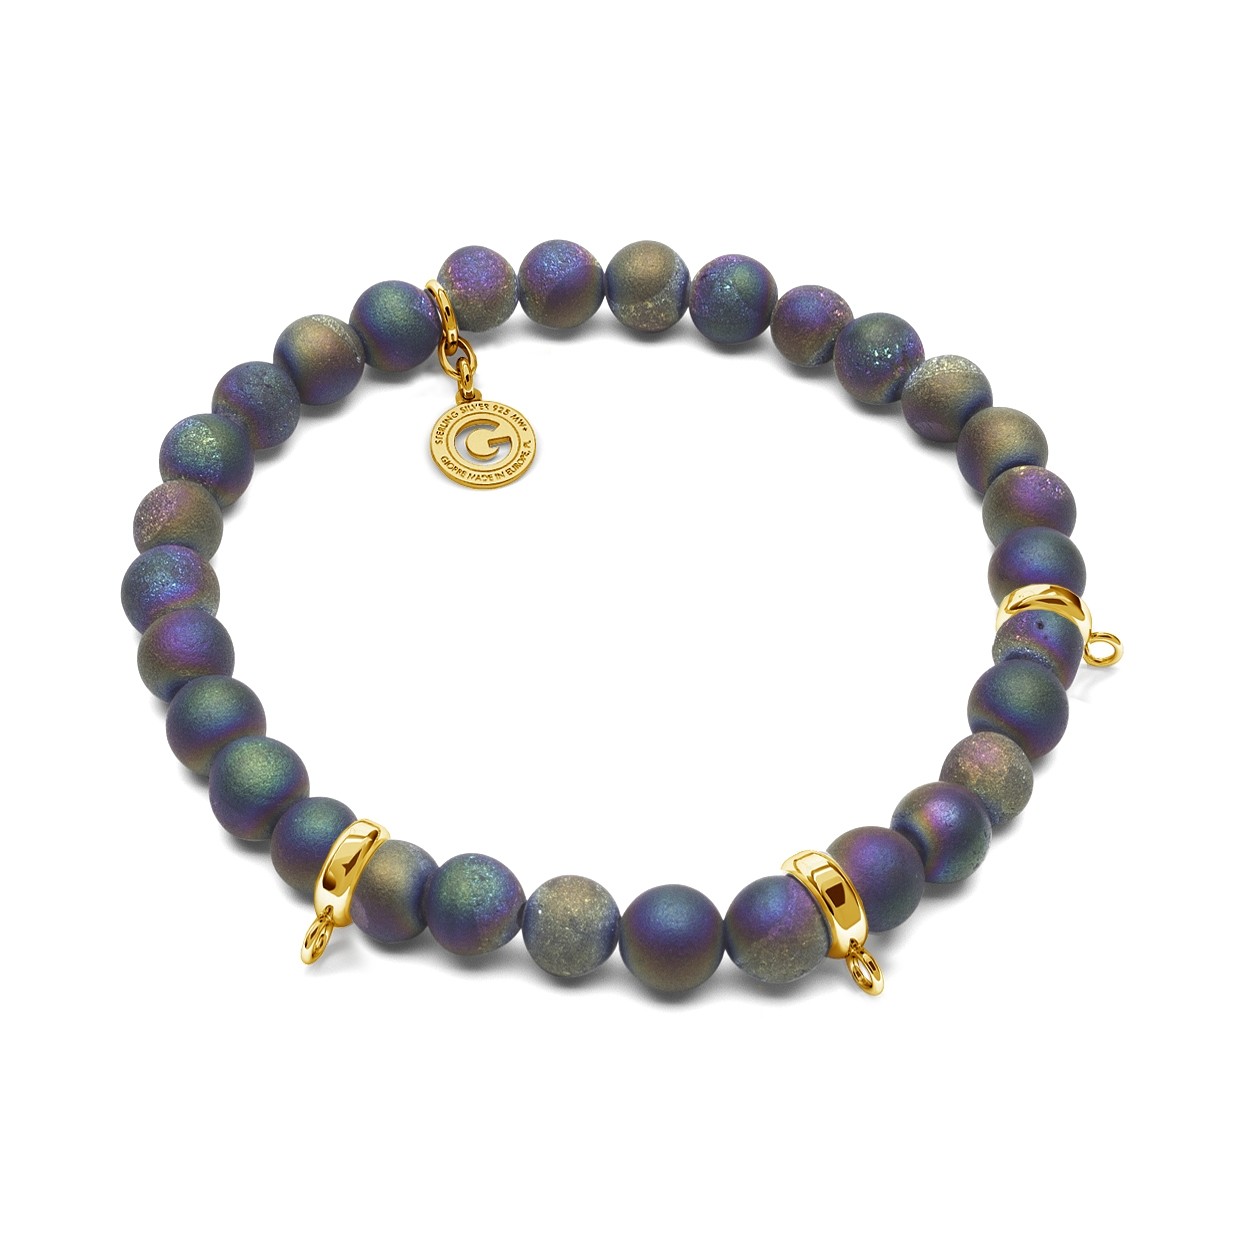 AGATHE, FLEXIBLE BRACELET WITH NATURAL STONES, FOR 3 CHARMS